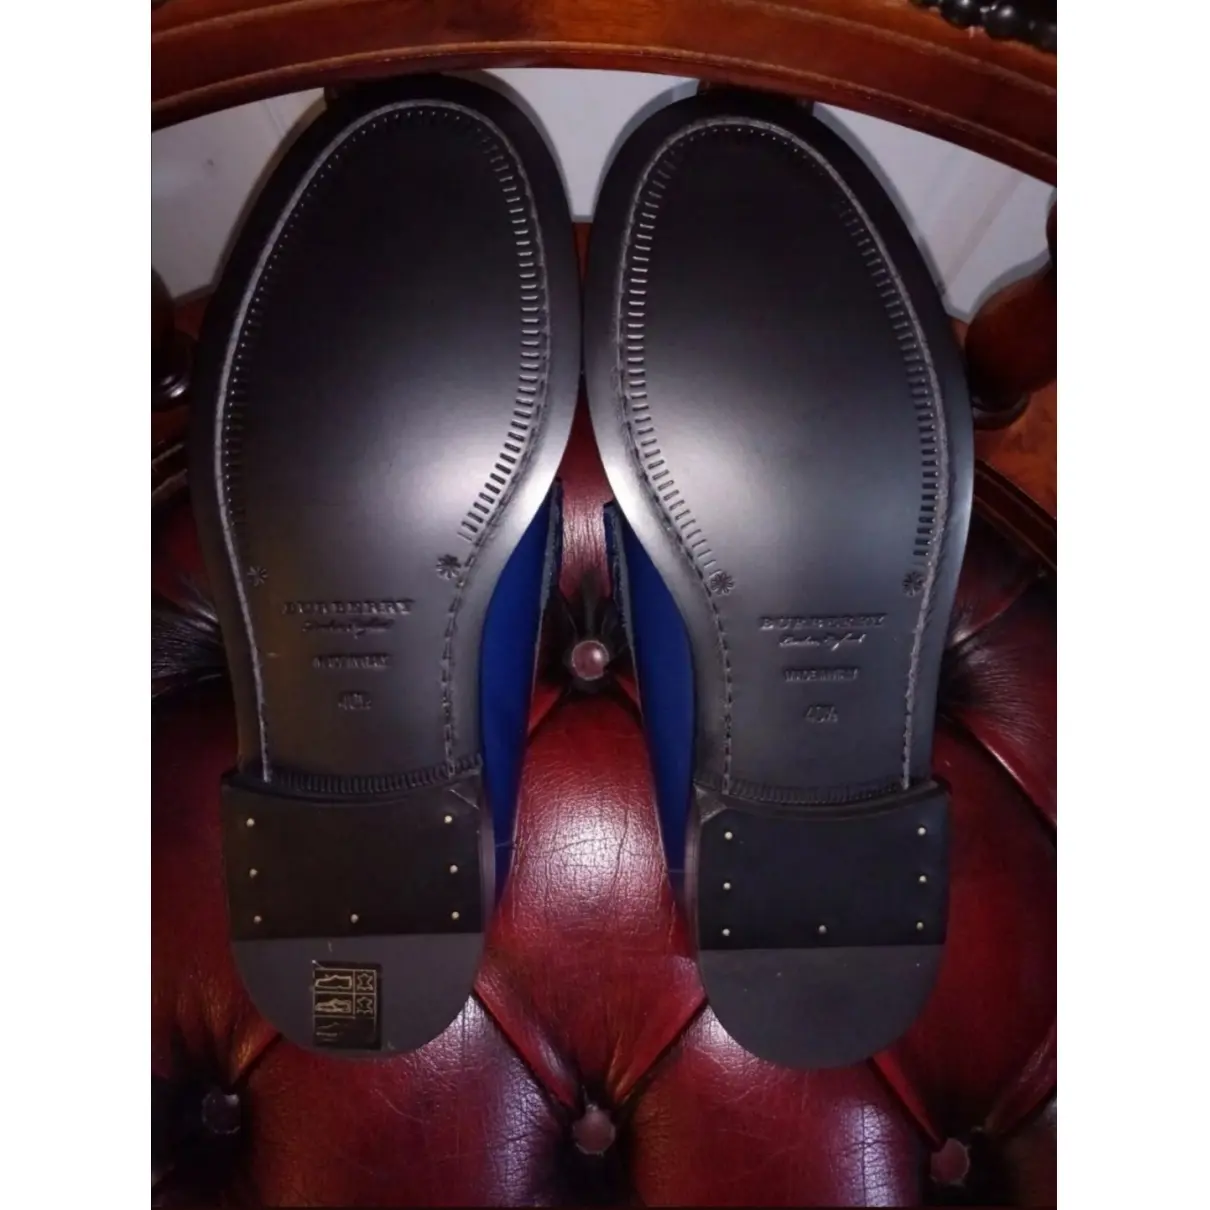 Buy Burberry Leather flats online